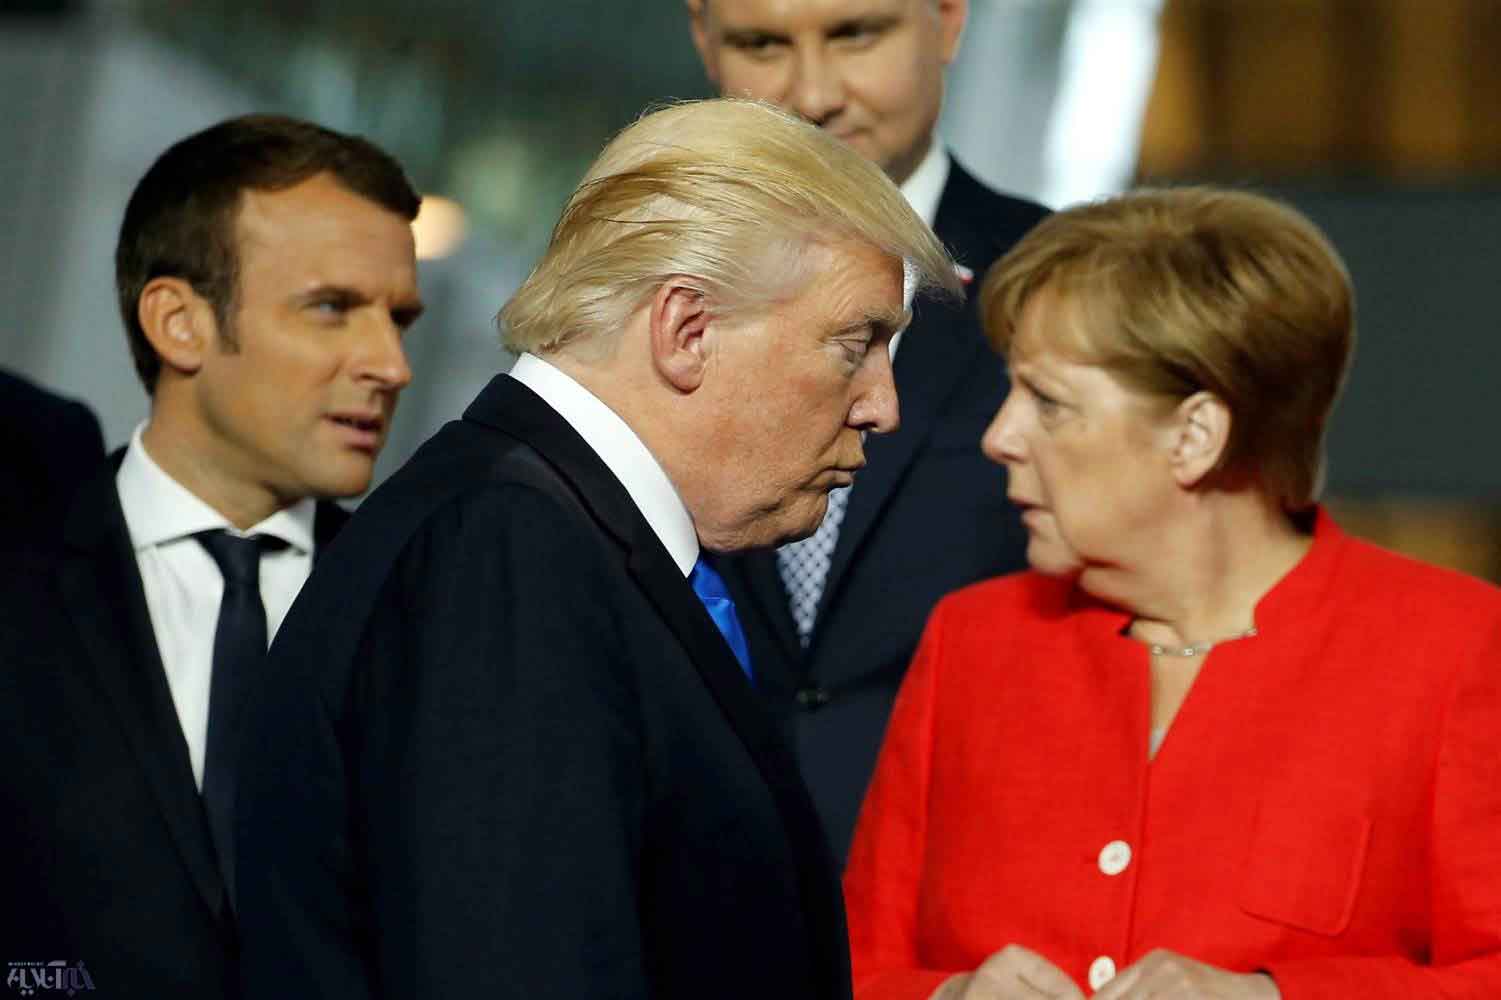 Europe’s Skepticism on Future of Relations with United States